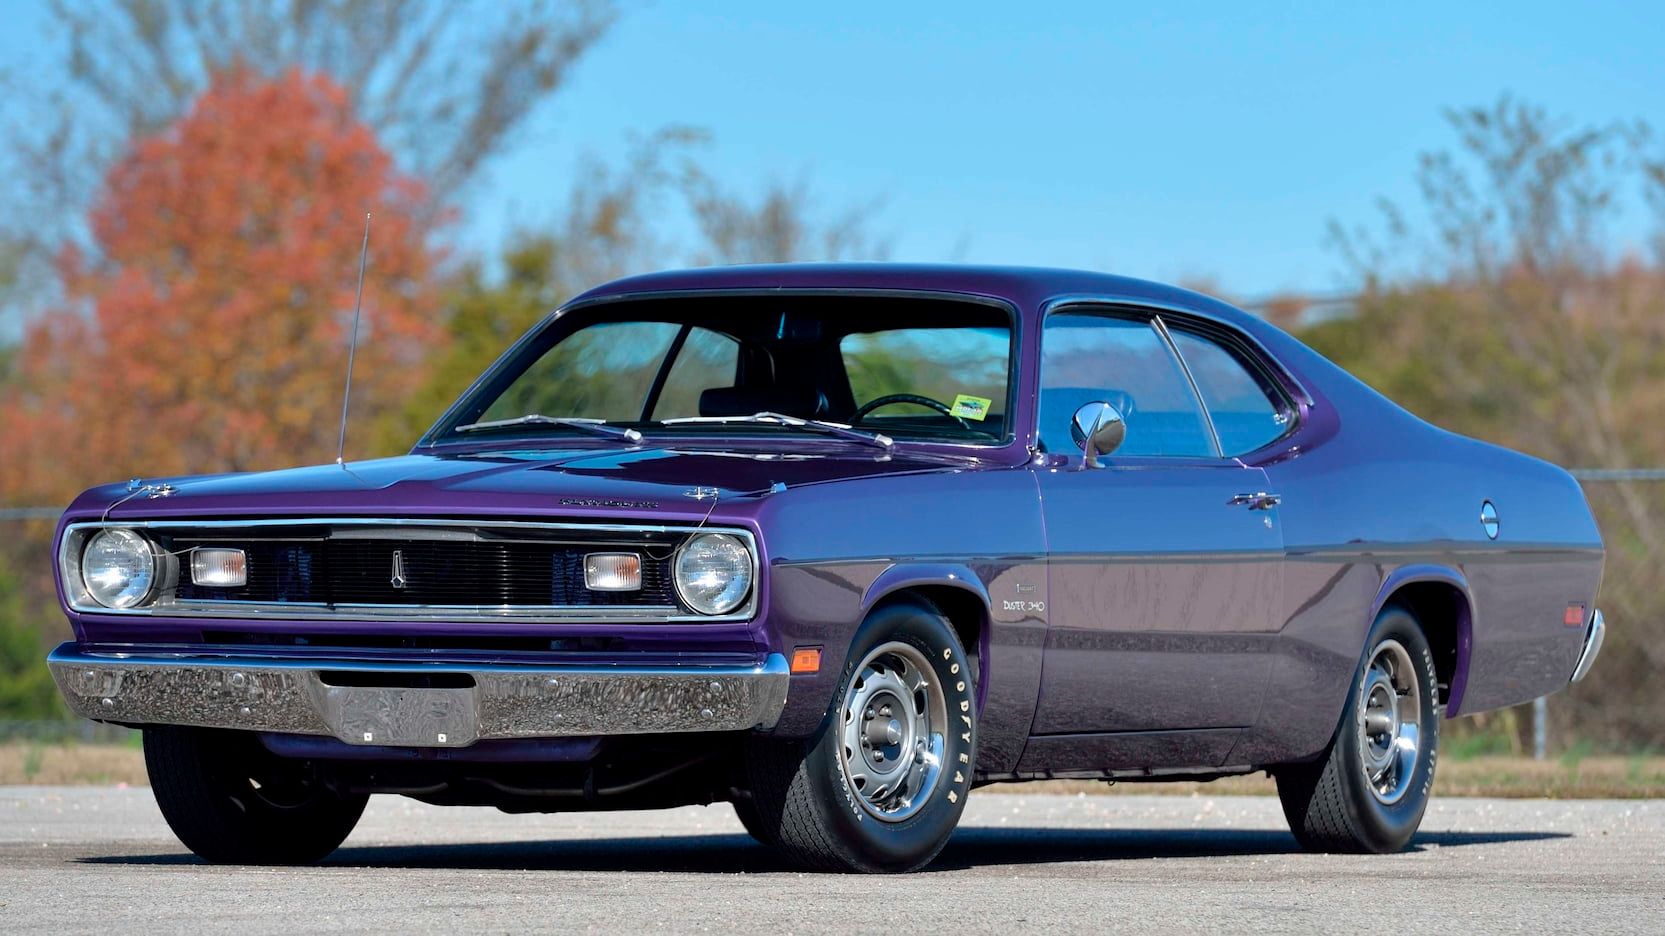 1970 Plymouth Duster 340 - 275 hp